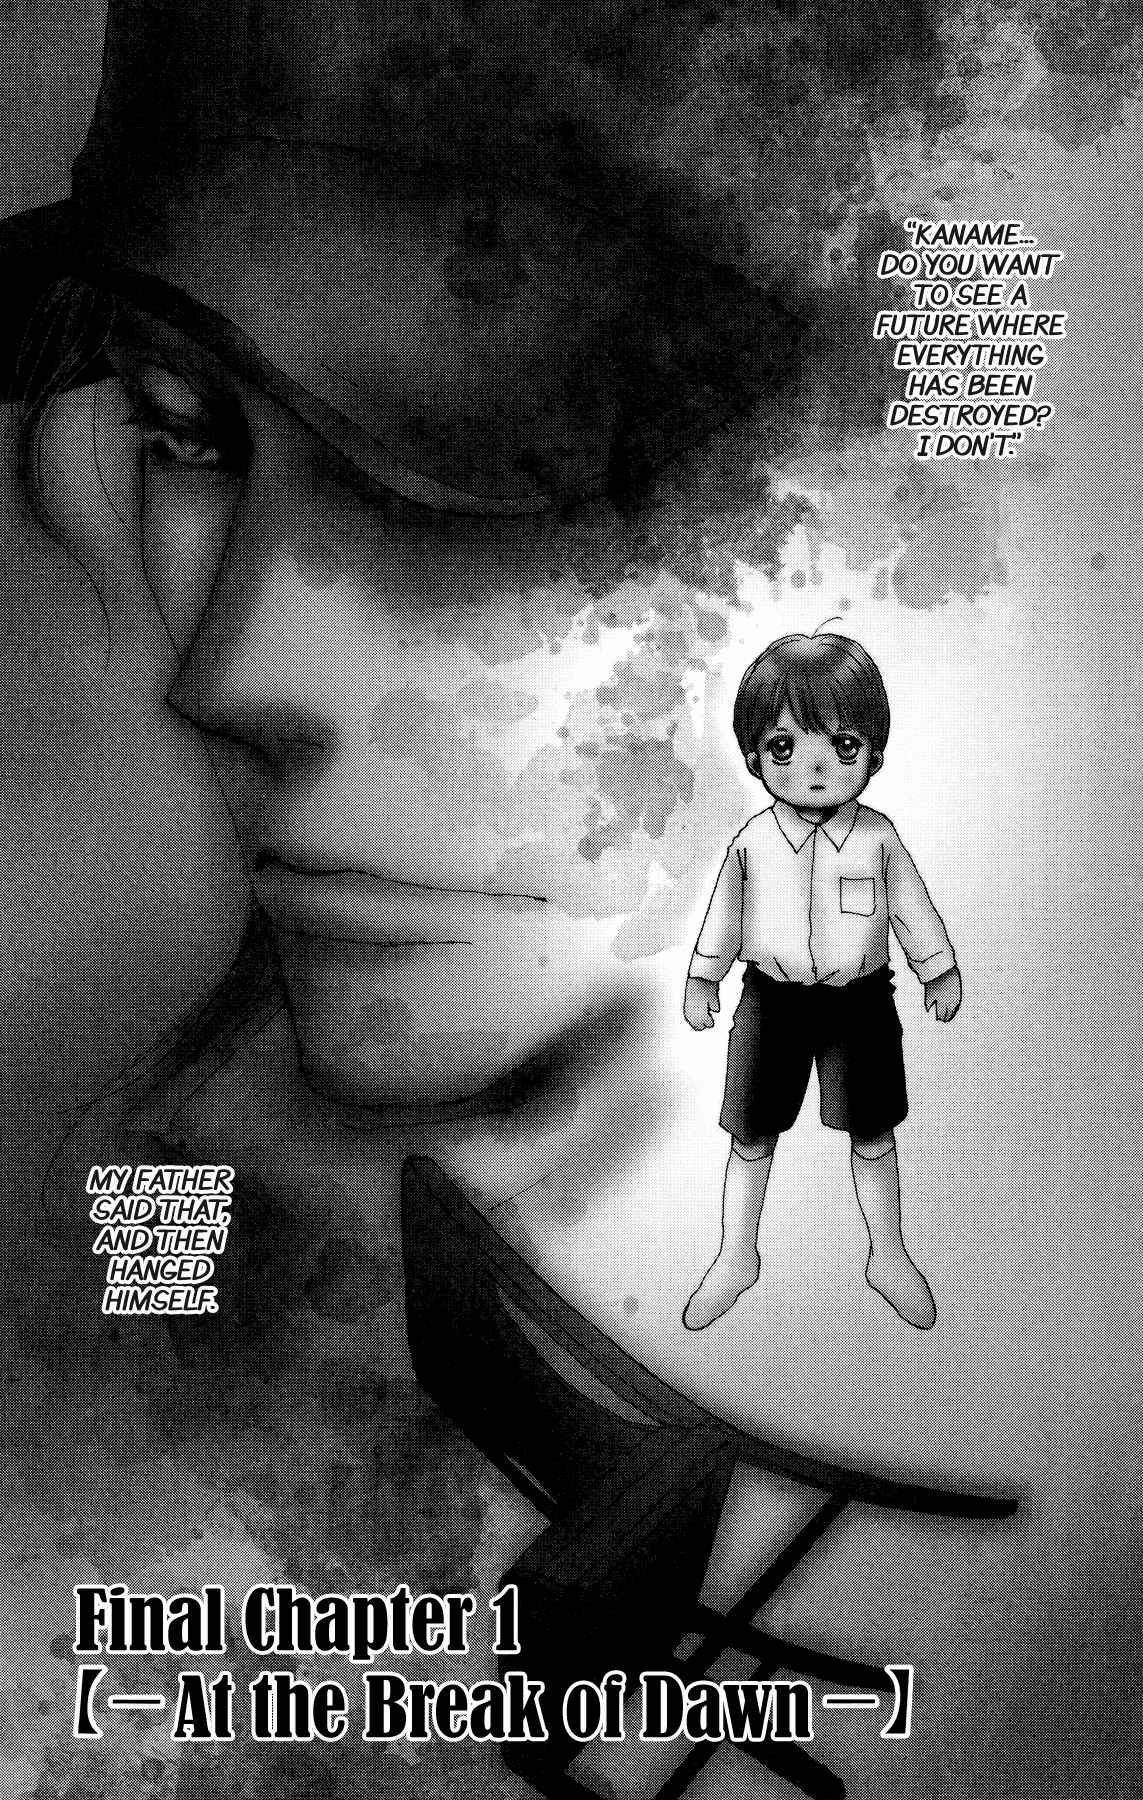 7 Seeds Vol. 34 Ch. 176 Final Chapter 1 [At the Break of Dawn]